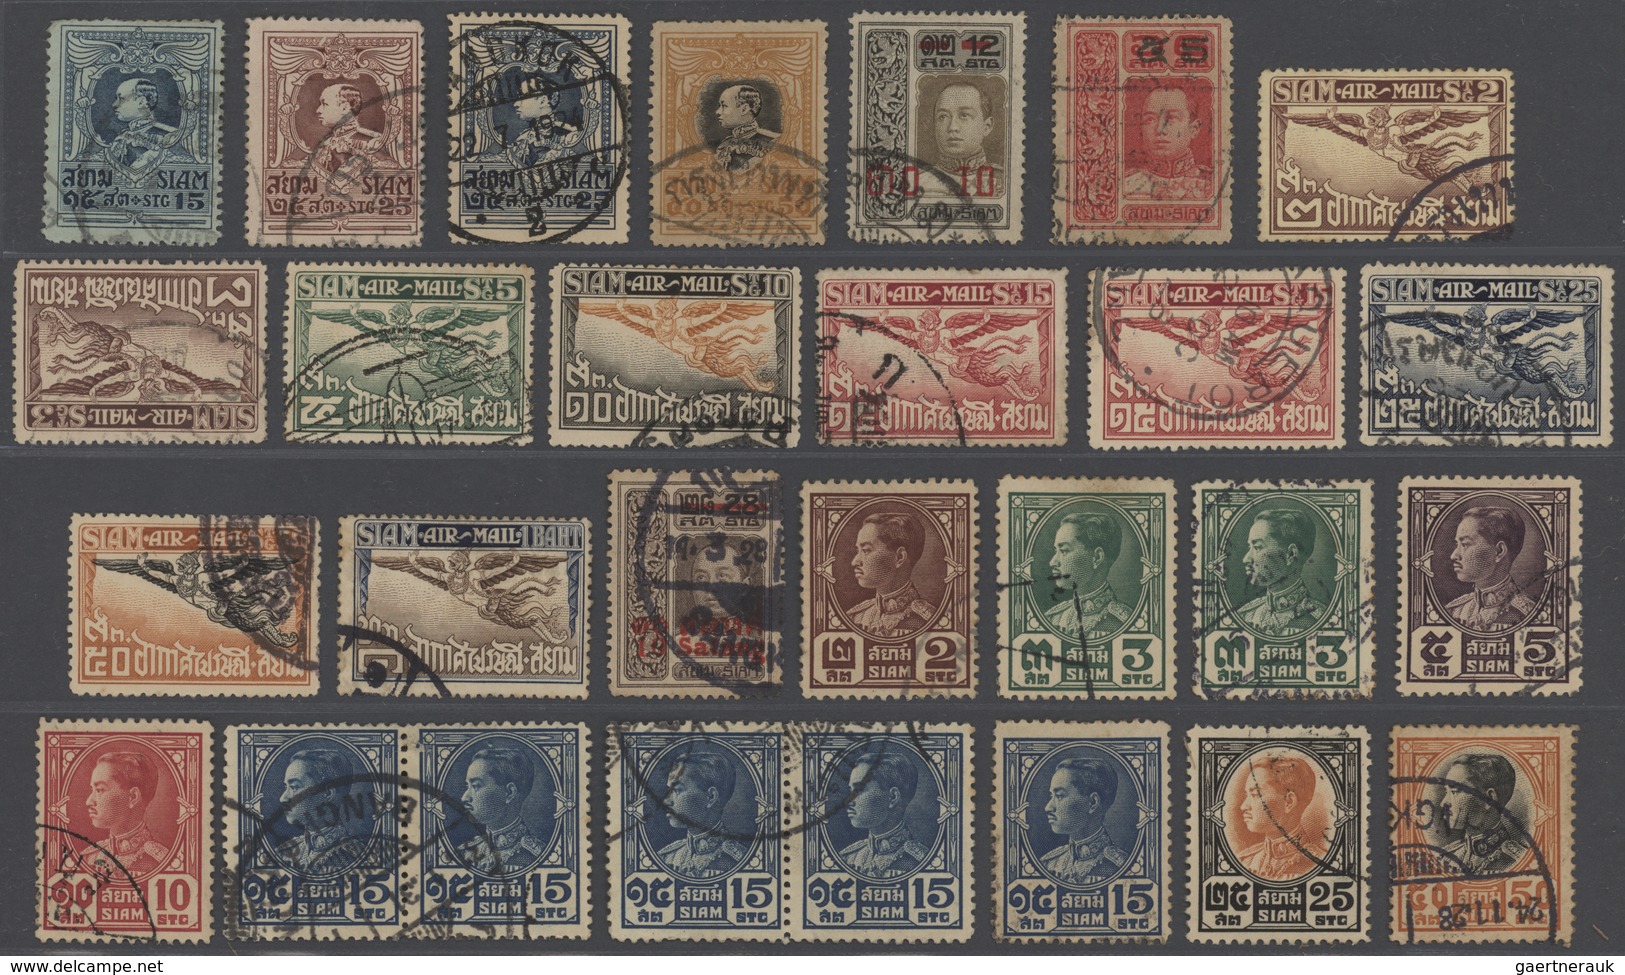 Thailand: 1883/1980, mostly used on large stockcards (from 1950 in envelopes), appr. 550 copies, inc